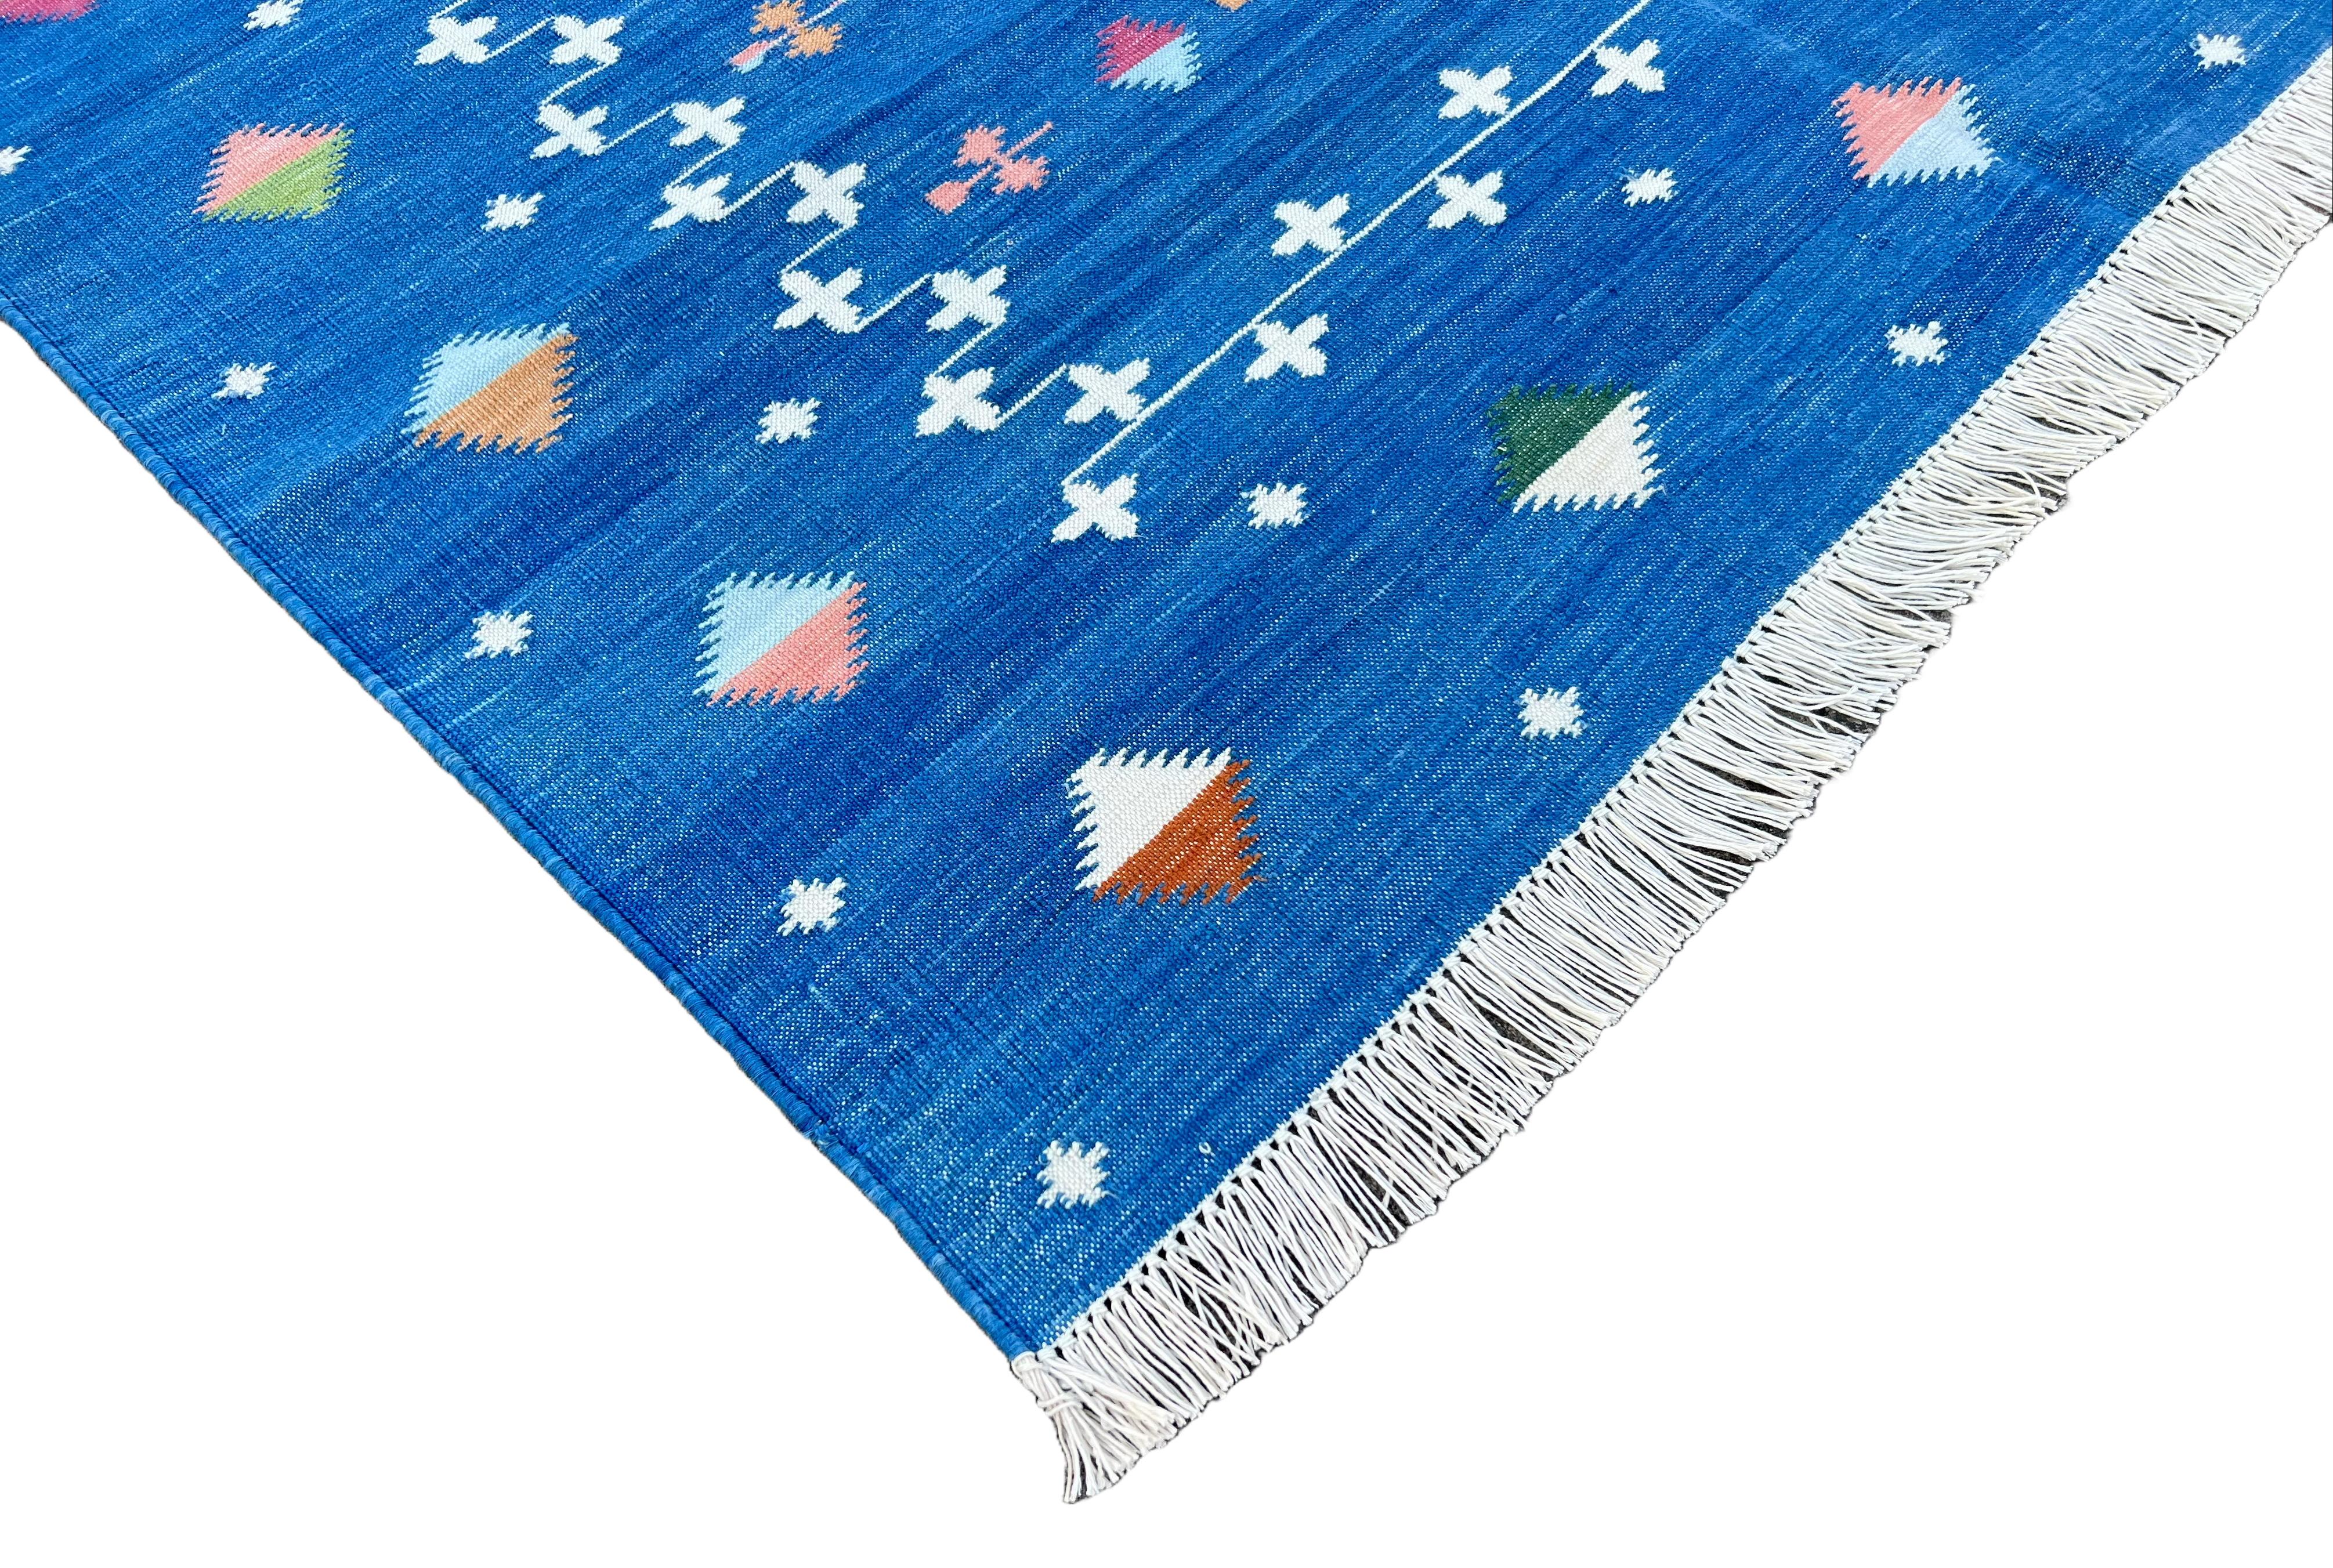 Cotton Vegetable Dyed Indigo Blue Shooting Star Rug-4'x6'
These special flat-weave dhurries are hand-woven with 15 ply 100% cotton yarn. Due to the special manufacturing techniques used to create our rugs, the size and color of each piece may vary a